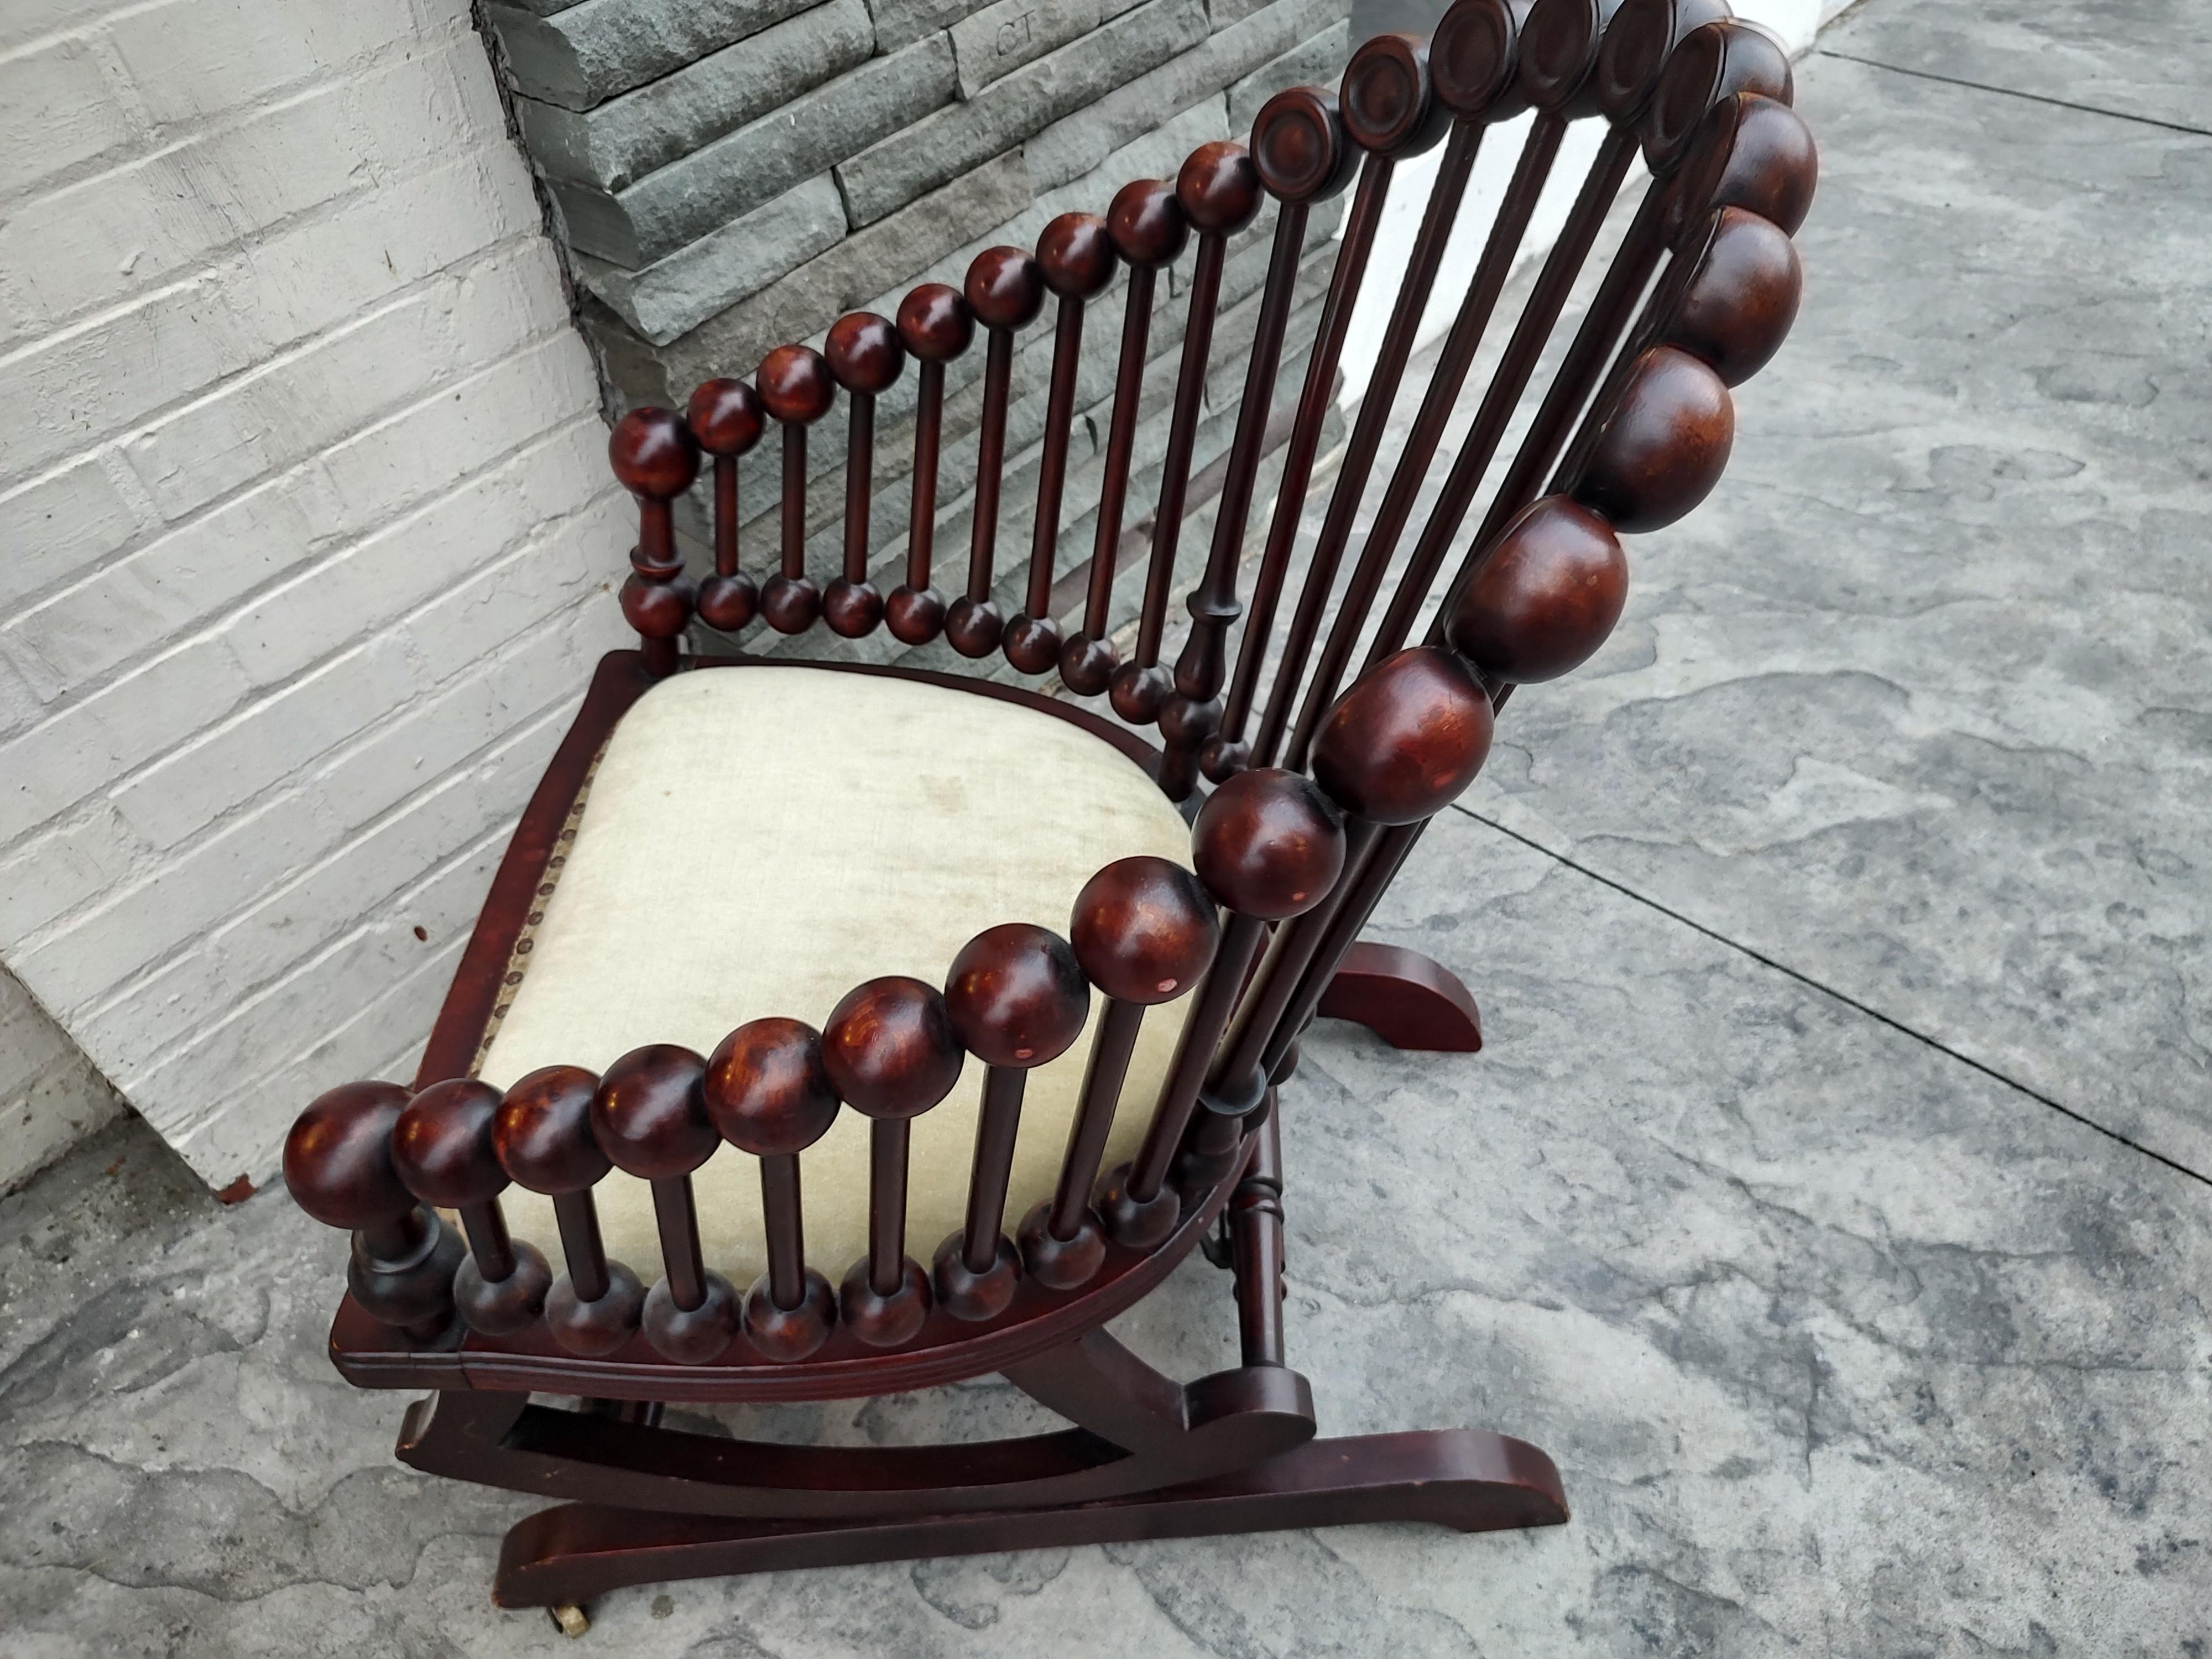 Spectacular lollipop platform rocker in mahogany by George Hunzinger. Late 19thc creation that is still relevant today. Seat has a spring system as well as being padded. This chair is in excellent original unrestored antique condition with no